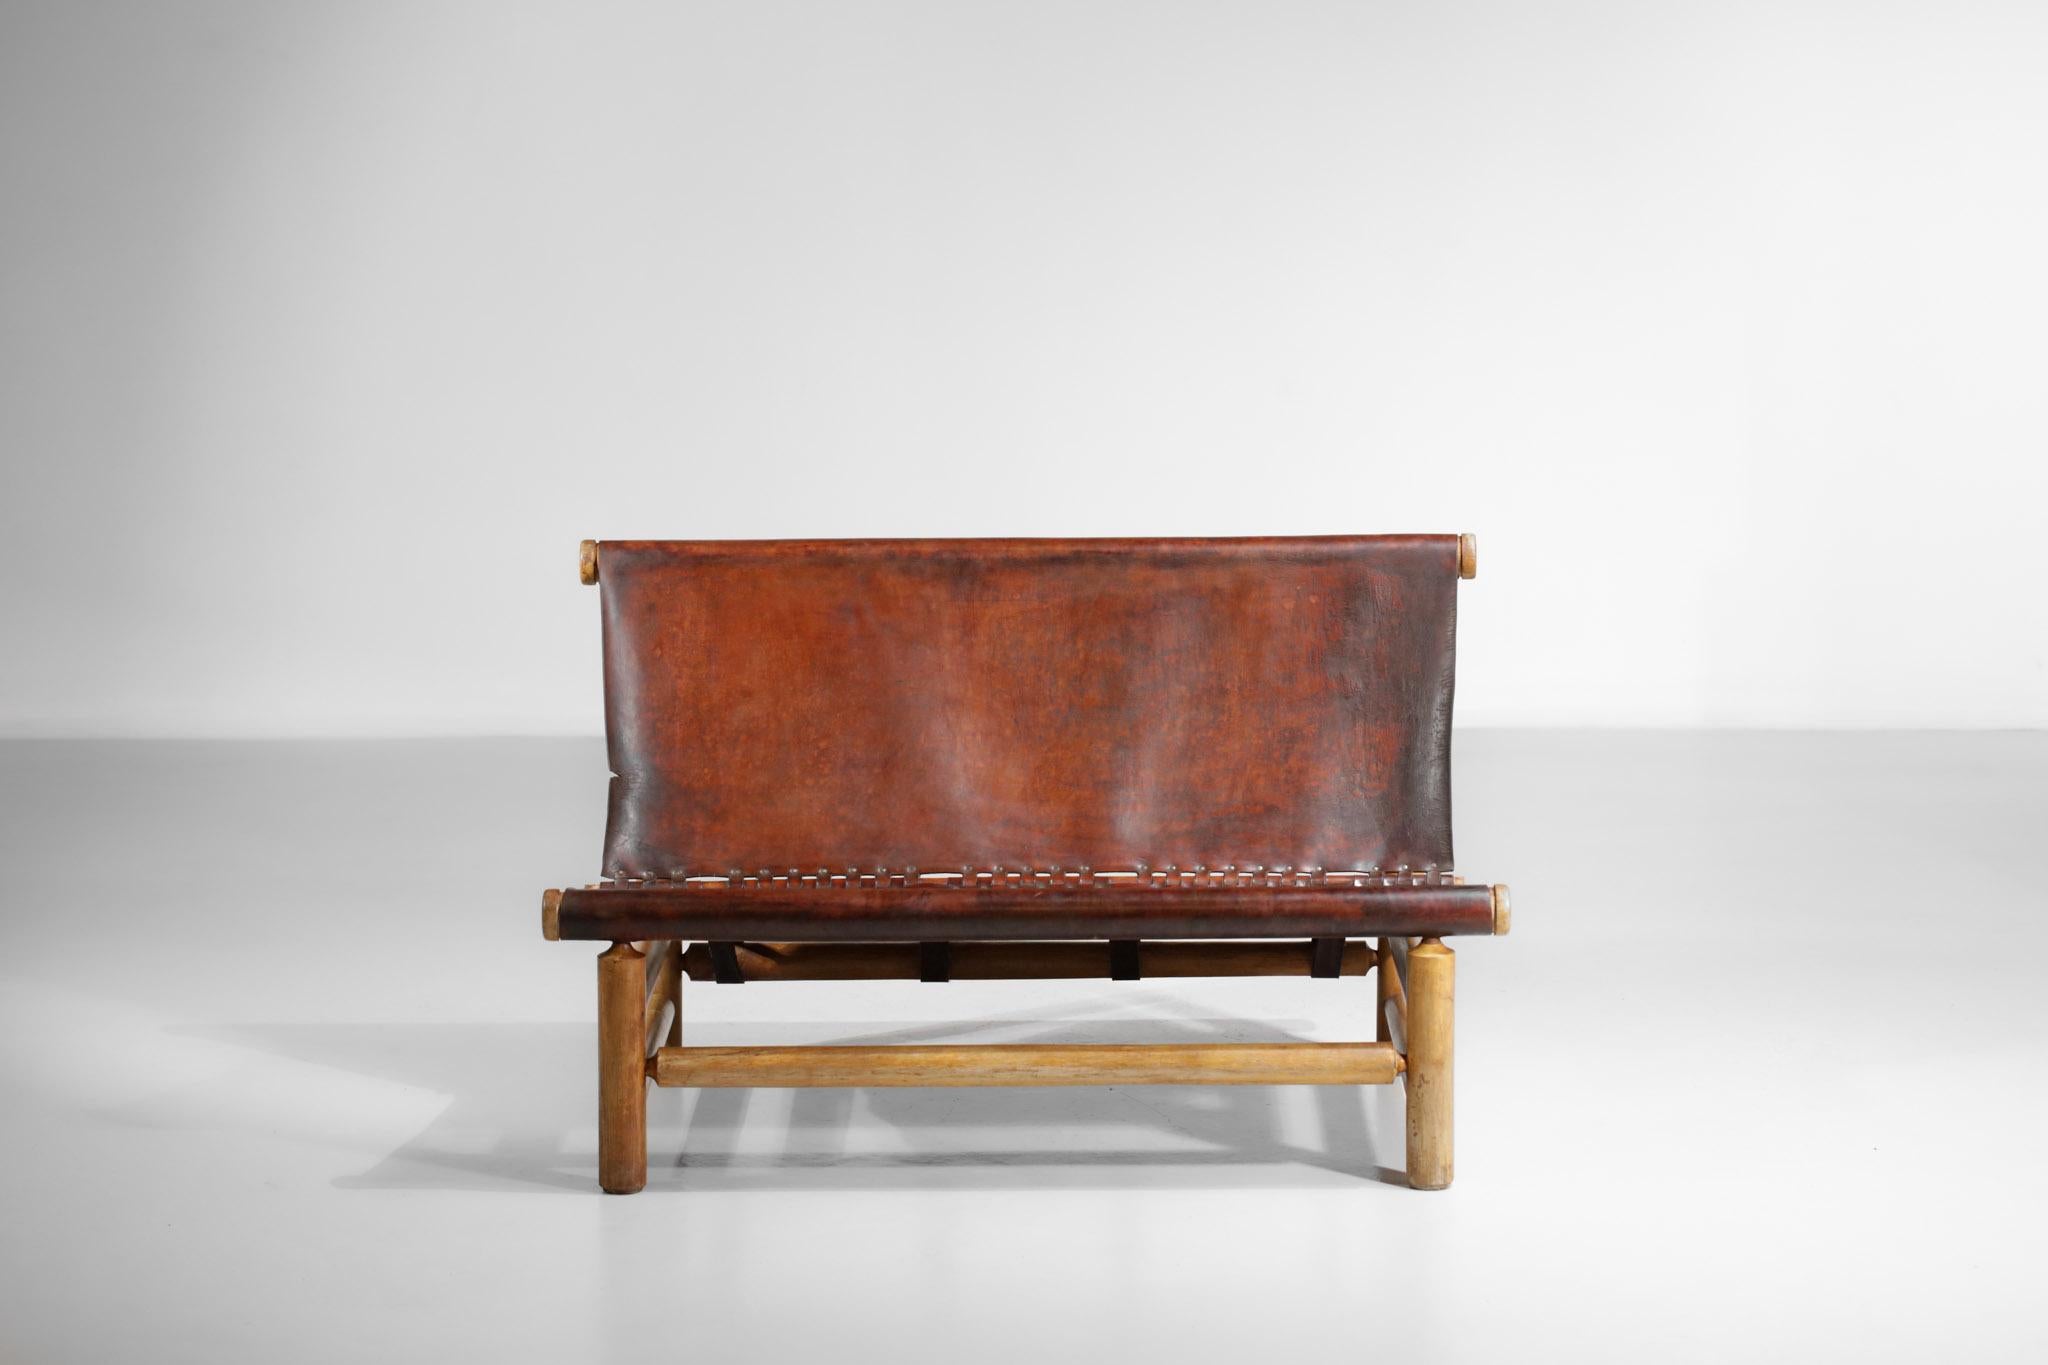 Pine Bench 50s Style Charlotte Perriand or Ilmarii Tapiovaraa Cognac Leather For Sale 11